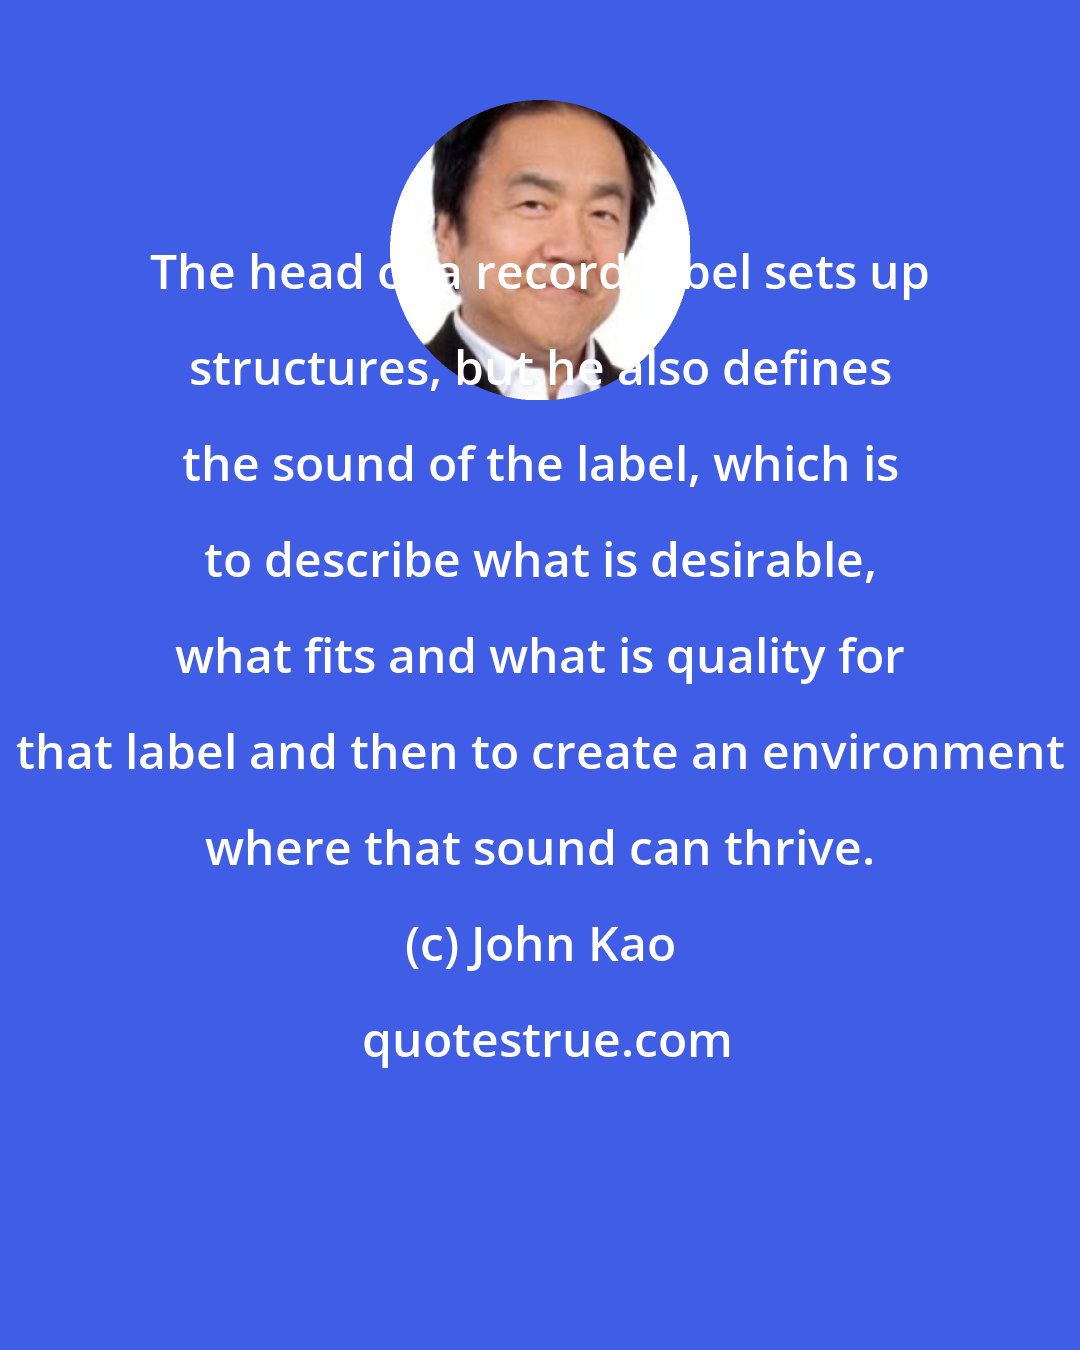 John Kao: The head of a record label sets up structures, but he also defines the sound of the label, which is to describe what is desirable, what fits and what is quality for that label and then to create an environment where that sound can thrive.